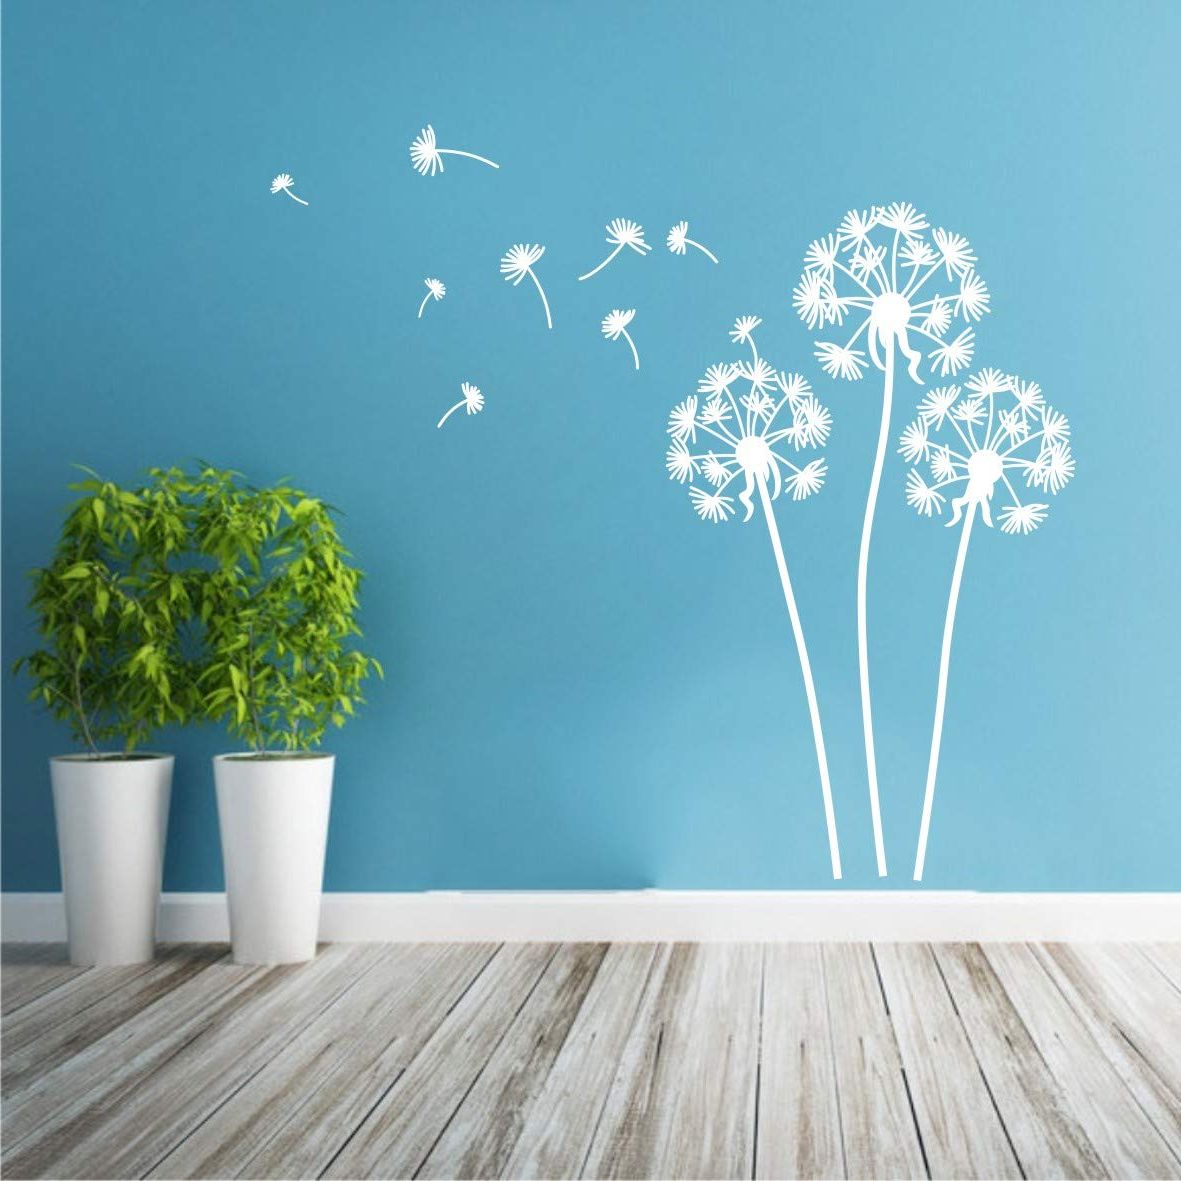 Famous Flying Dandelion Wall Art Intended For Wall Decal Flying Dandelion Plant Vinyl Wall Stickers Home Living Room Decor  Kids Nursery Room Removable (View 12 of 15)